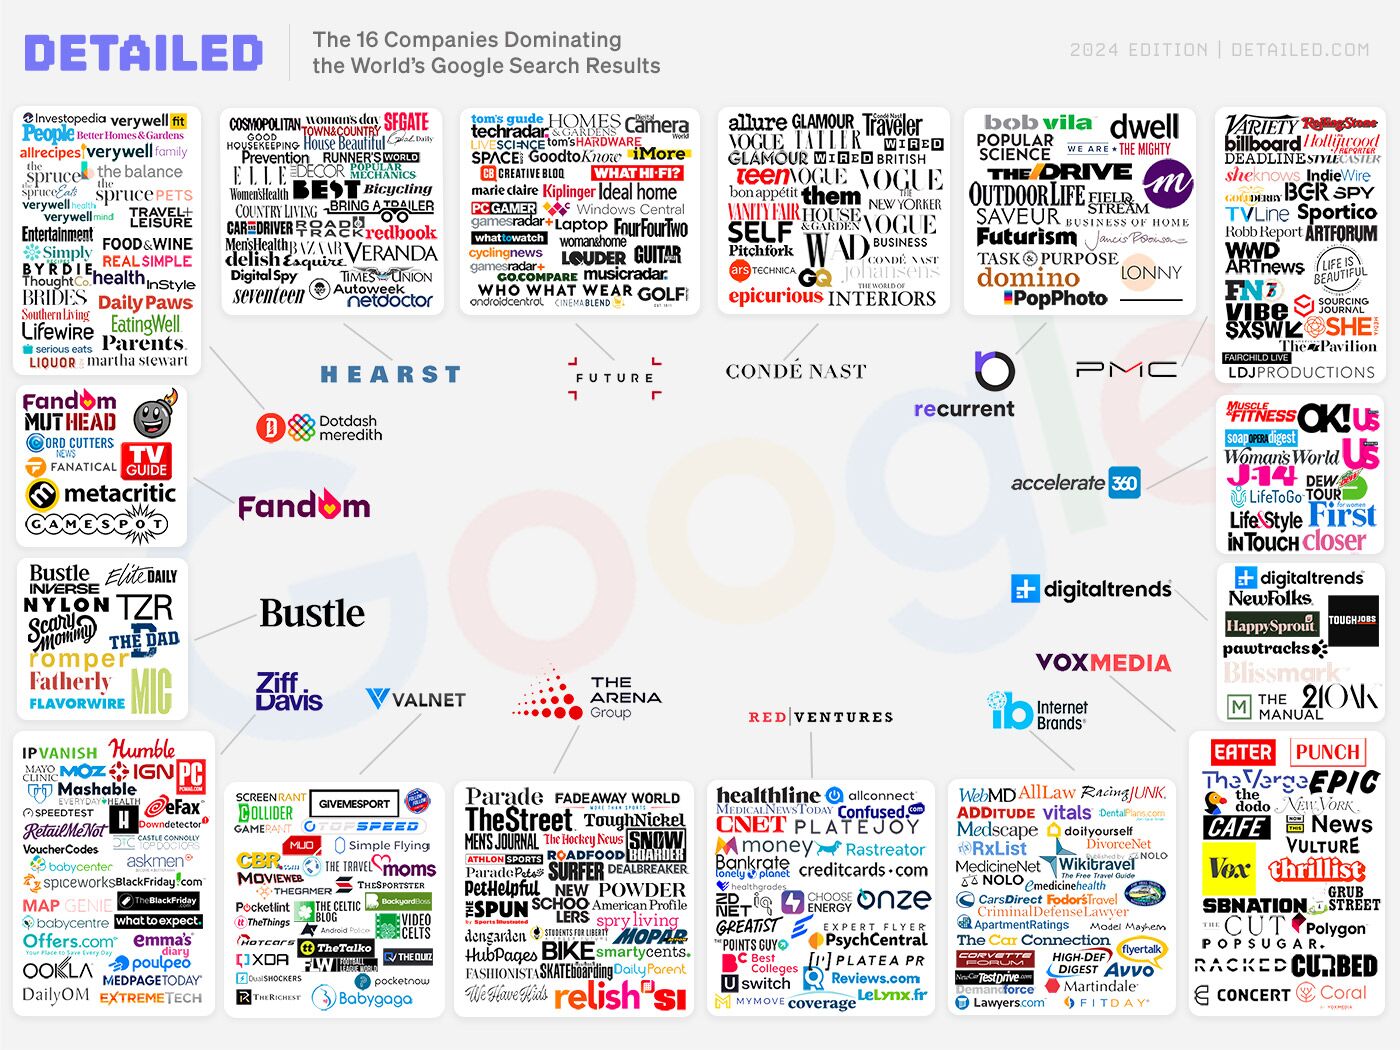 The 16 companies getting 3.5 billion monthly clicks from Google across 588 ،nds